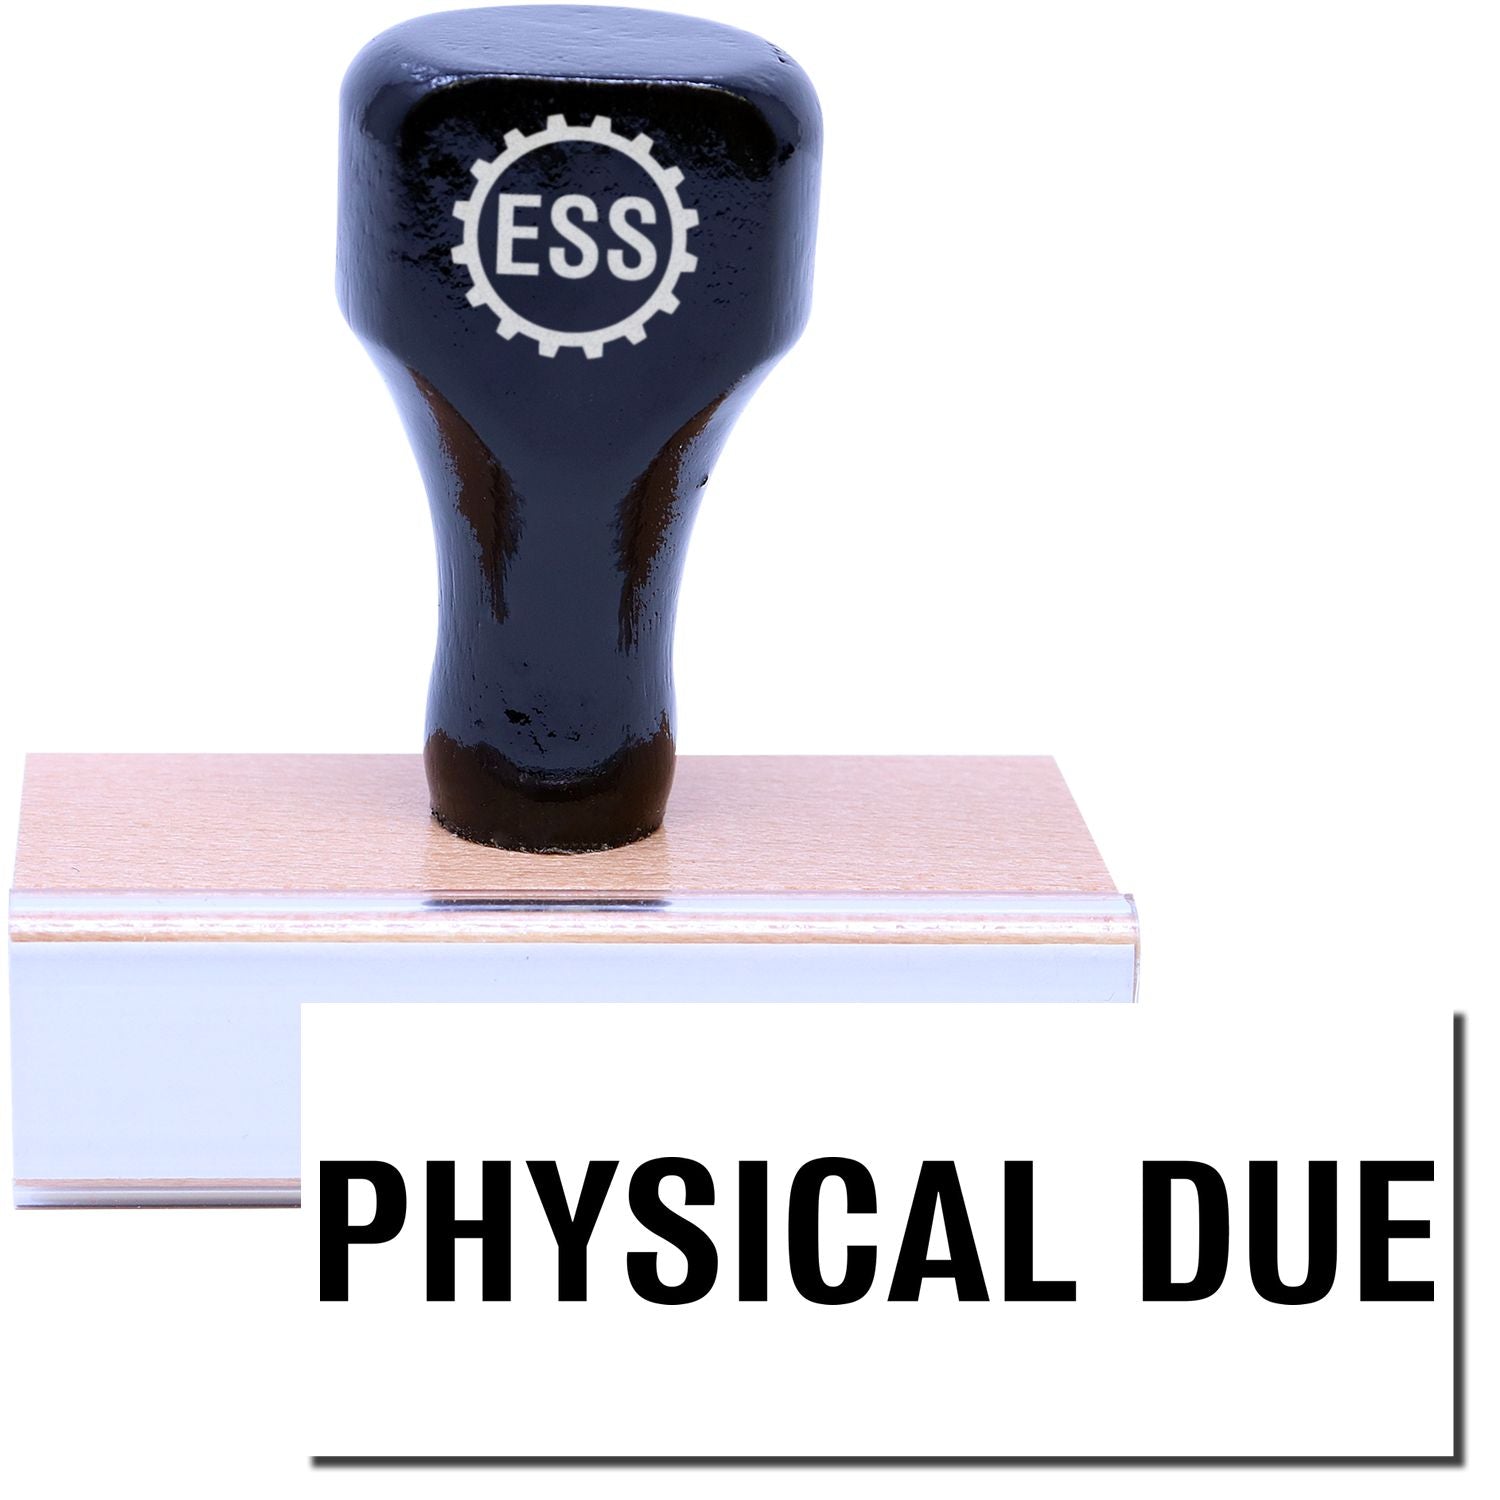 A stock office rubber stamp with a stamped image showing how the text "PHYSICAL DUE" in bold font is displayed after stamping.